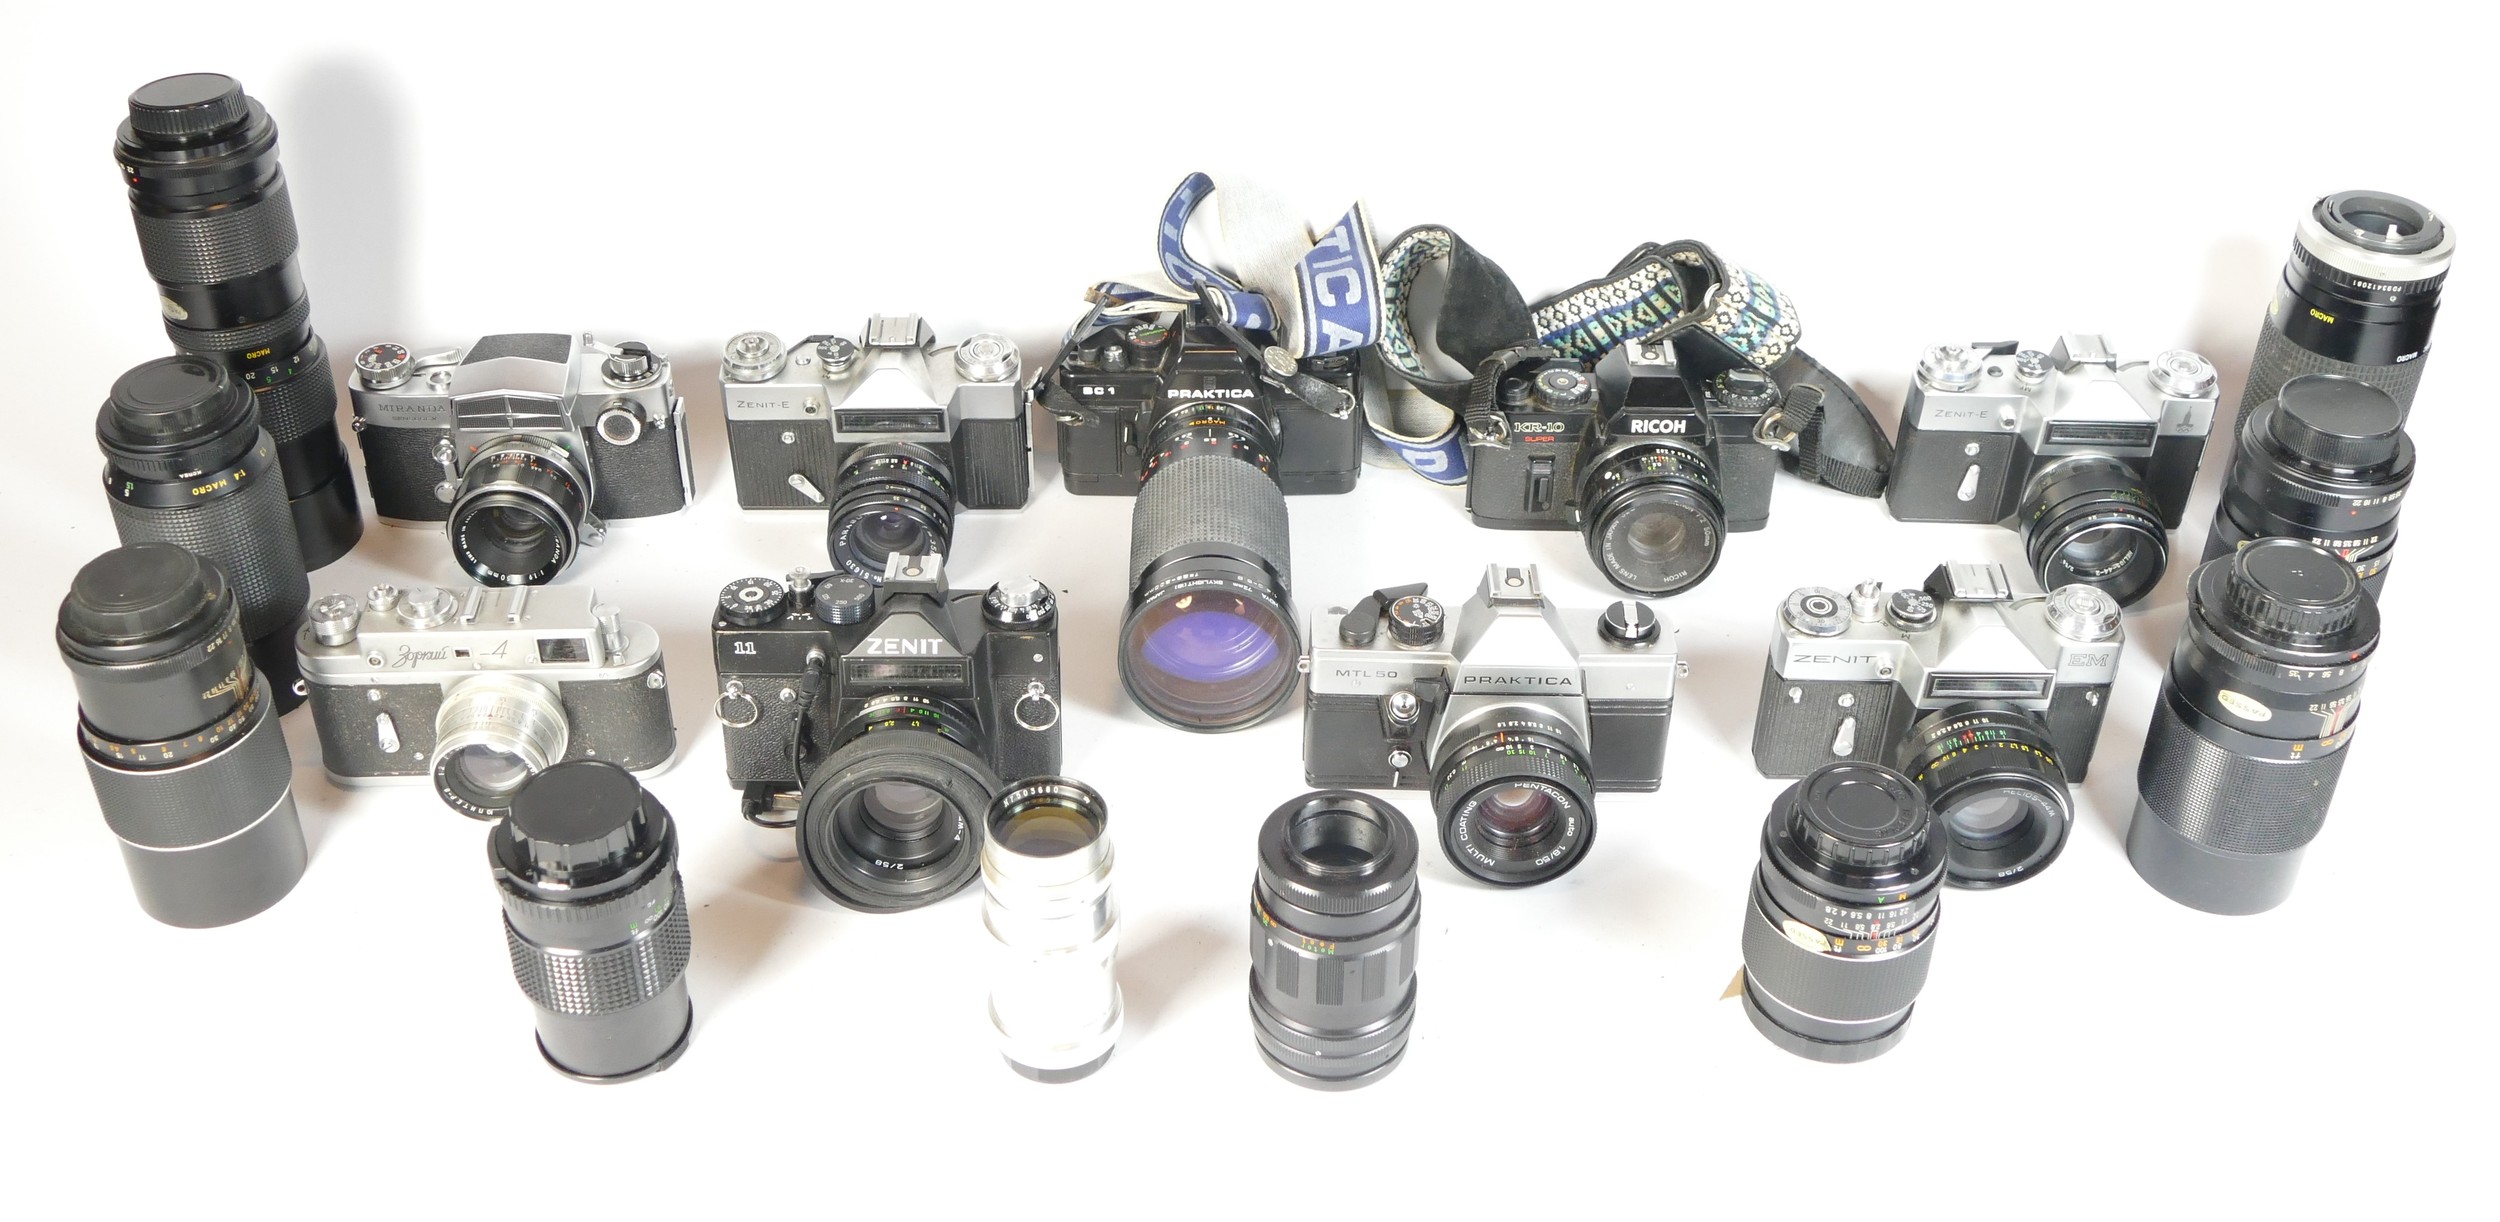 Eight SLR vintage film cameras to include a Zenit E, a Praktica BC1, a Ricoh KR10 and a Zenit II.